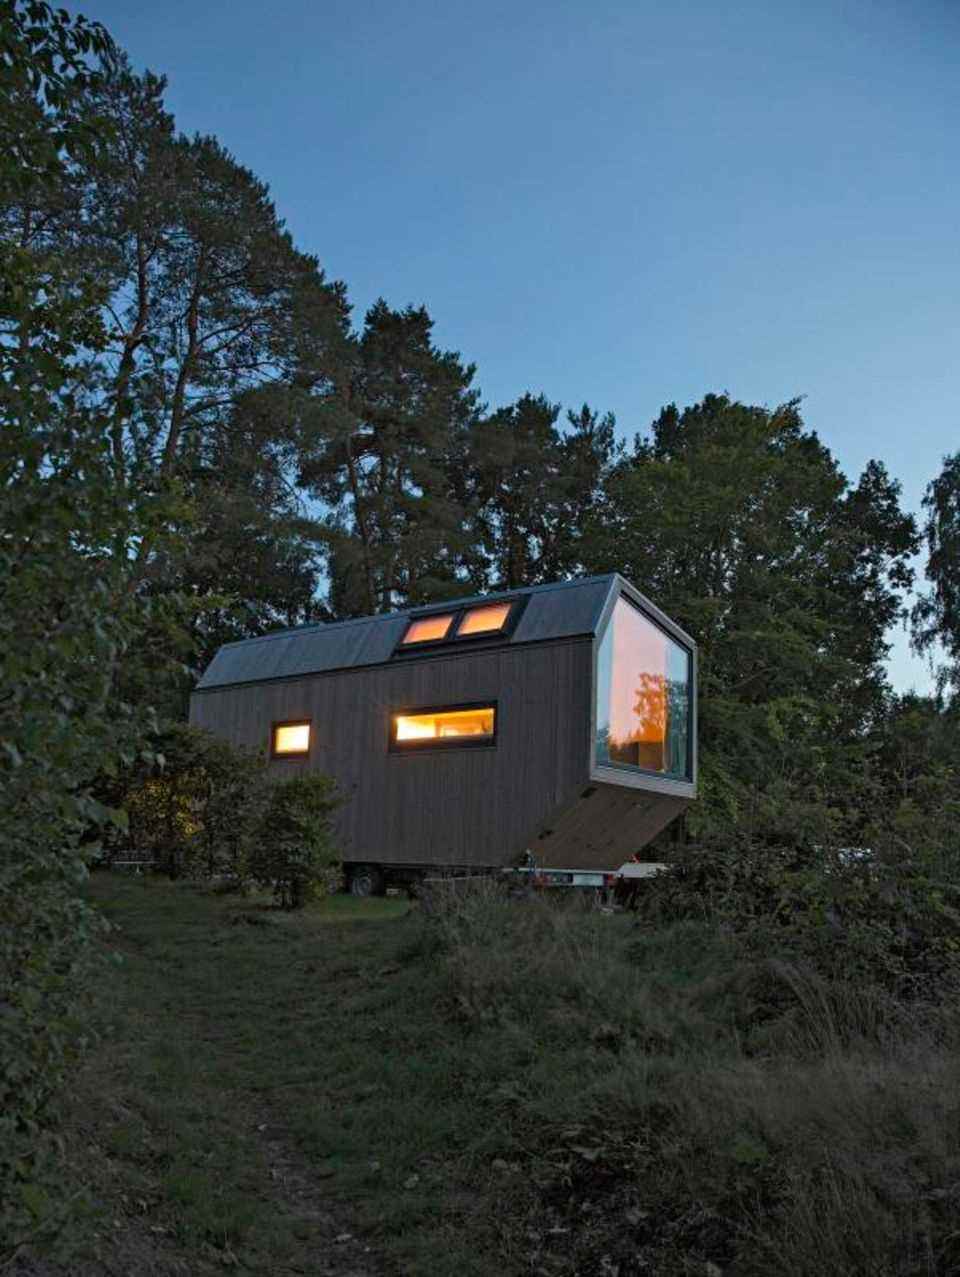 Time out in the Tiny House: The Tiny House at night